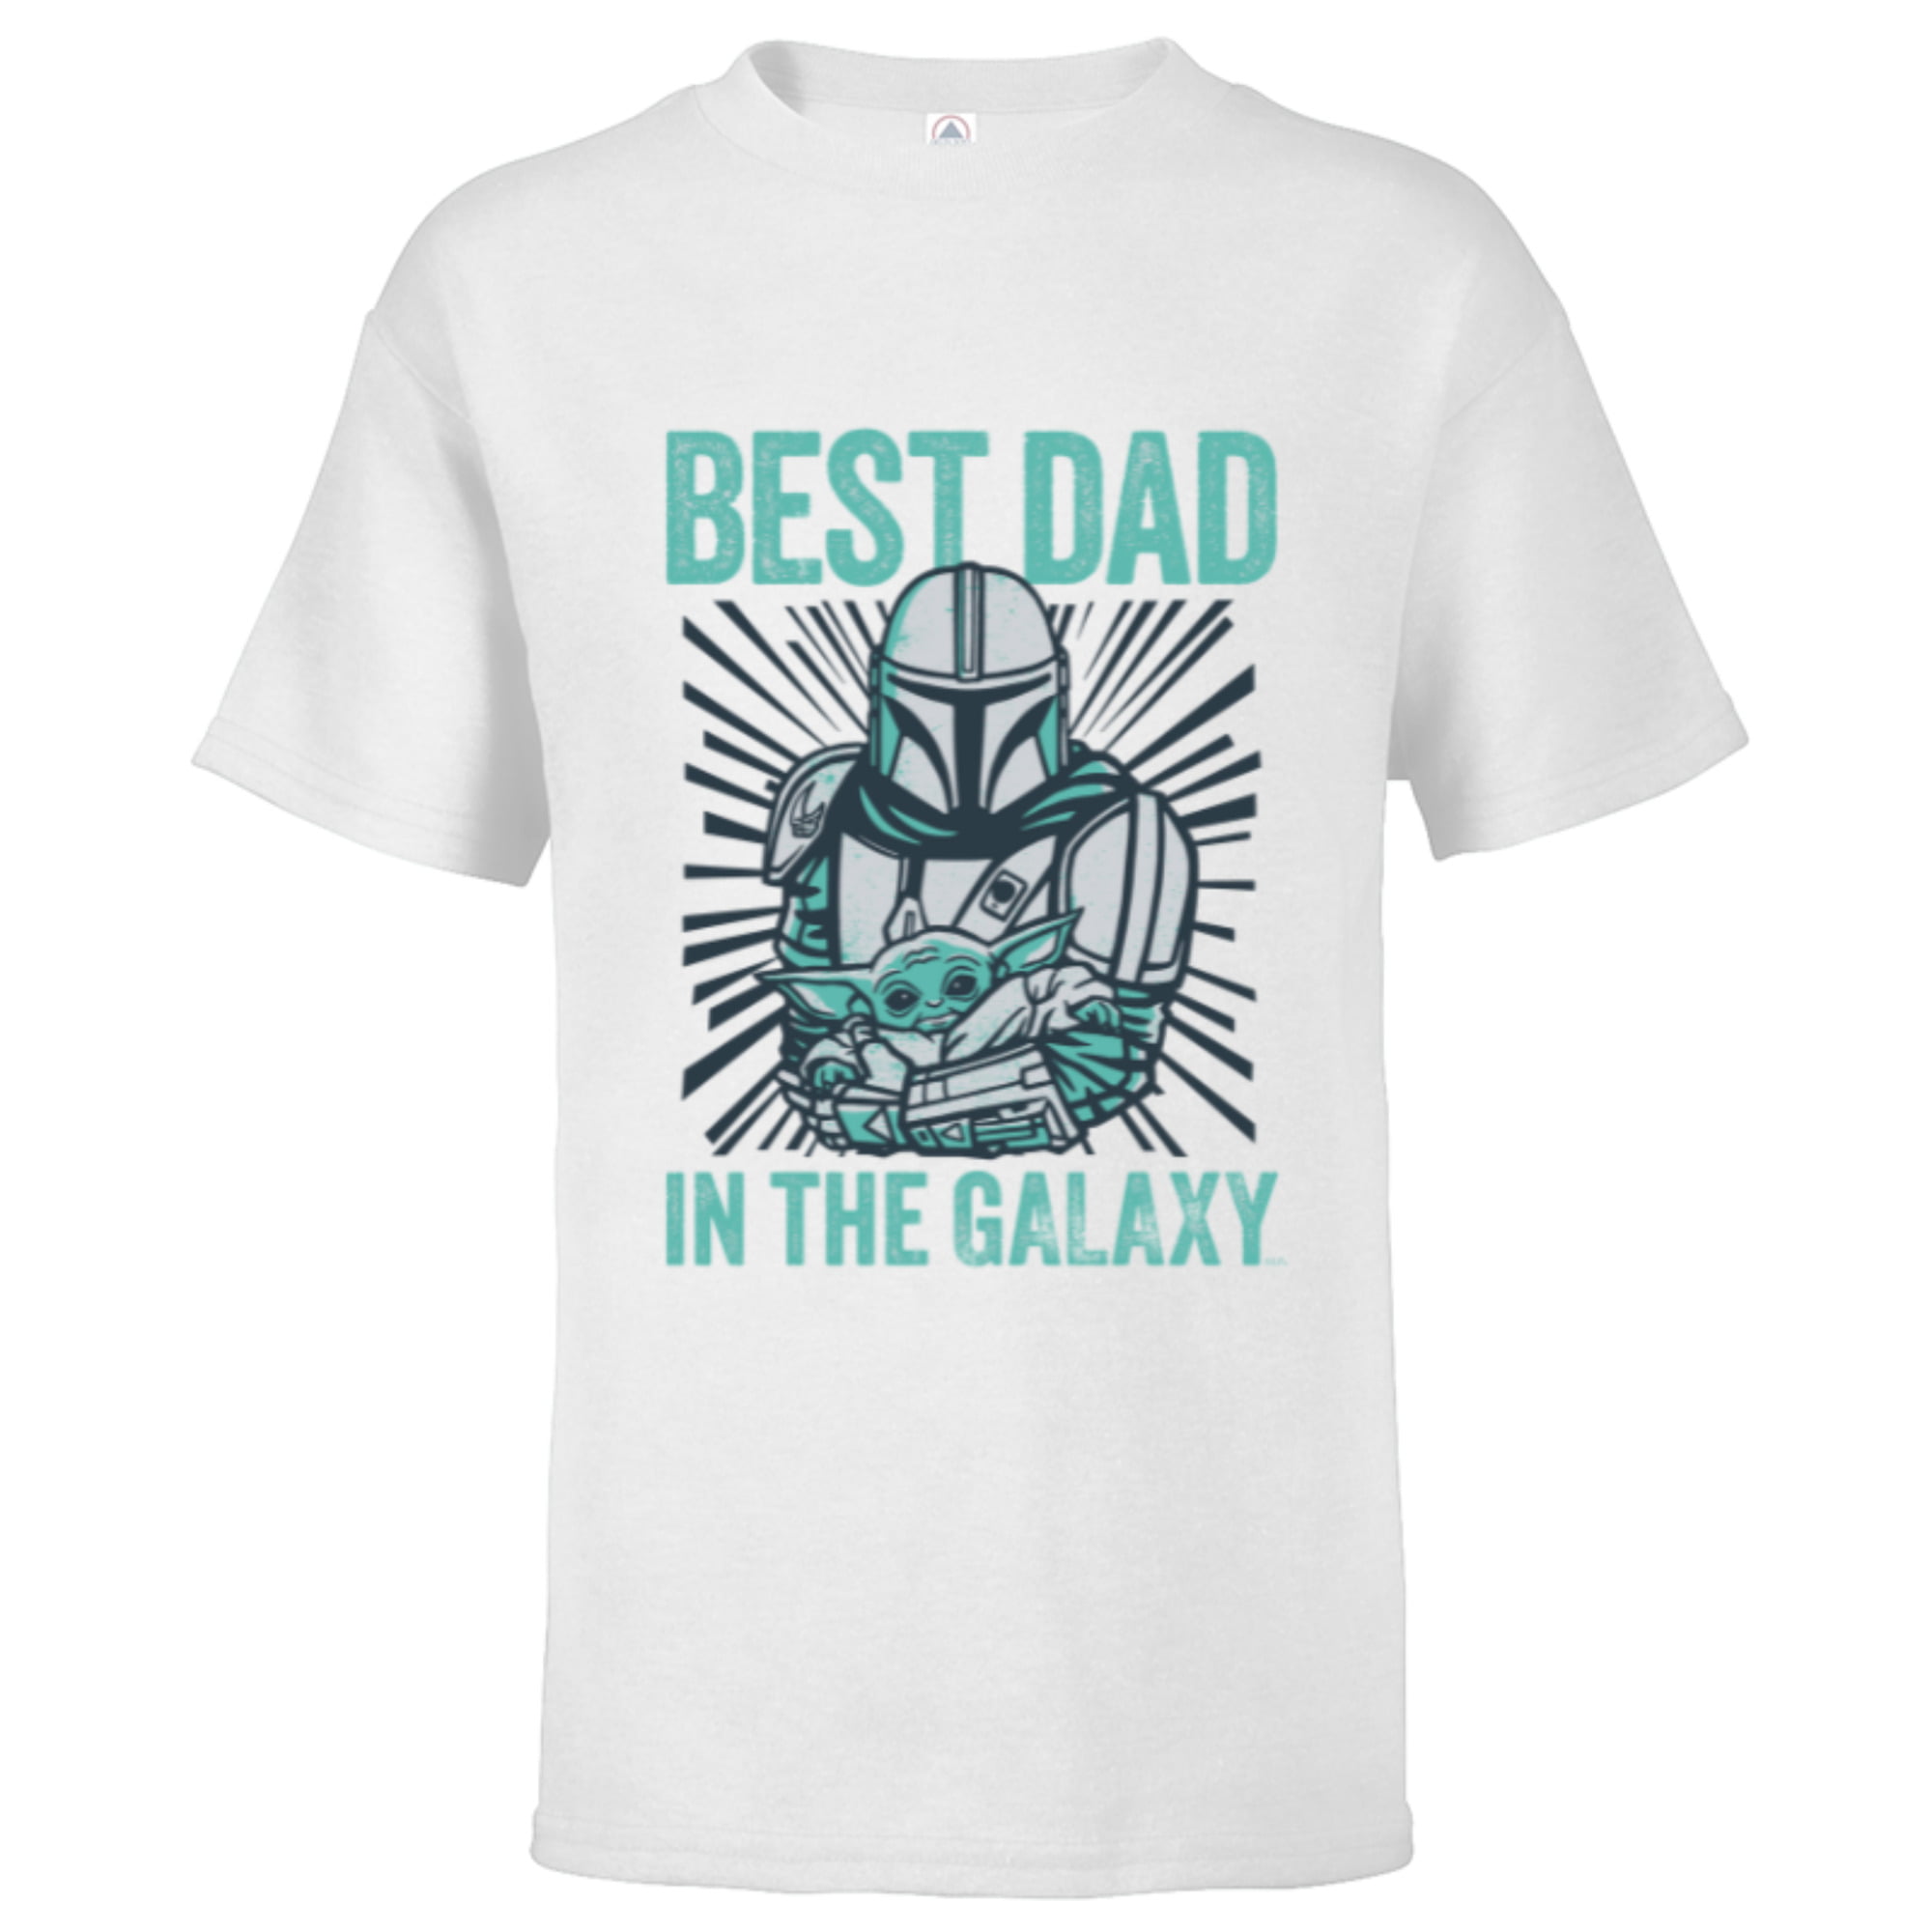 Customized-White for Mandalorian Short Wars in and Shirt The Star Dad Best Grogu - Galaxy Sleeve the - Kids T-